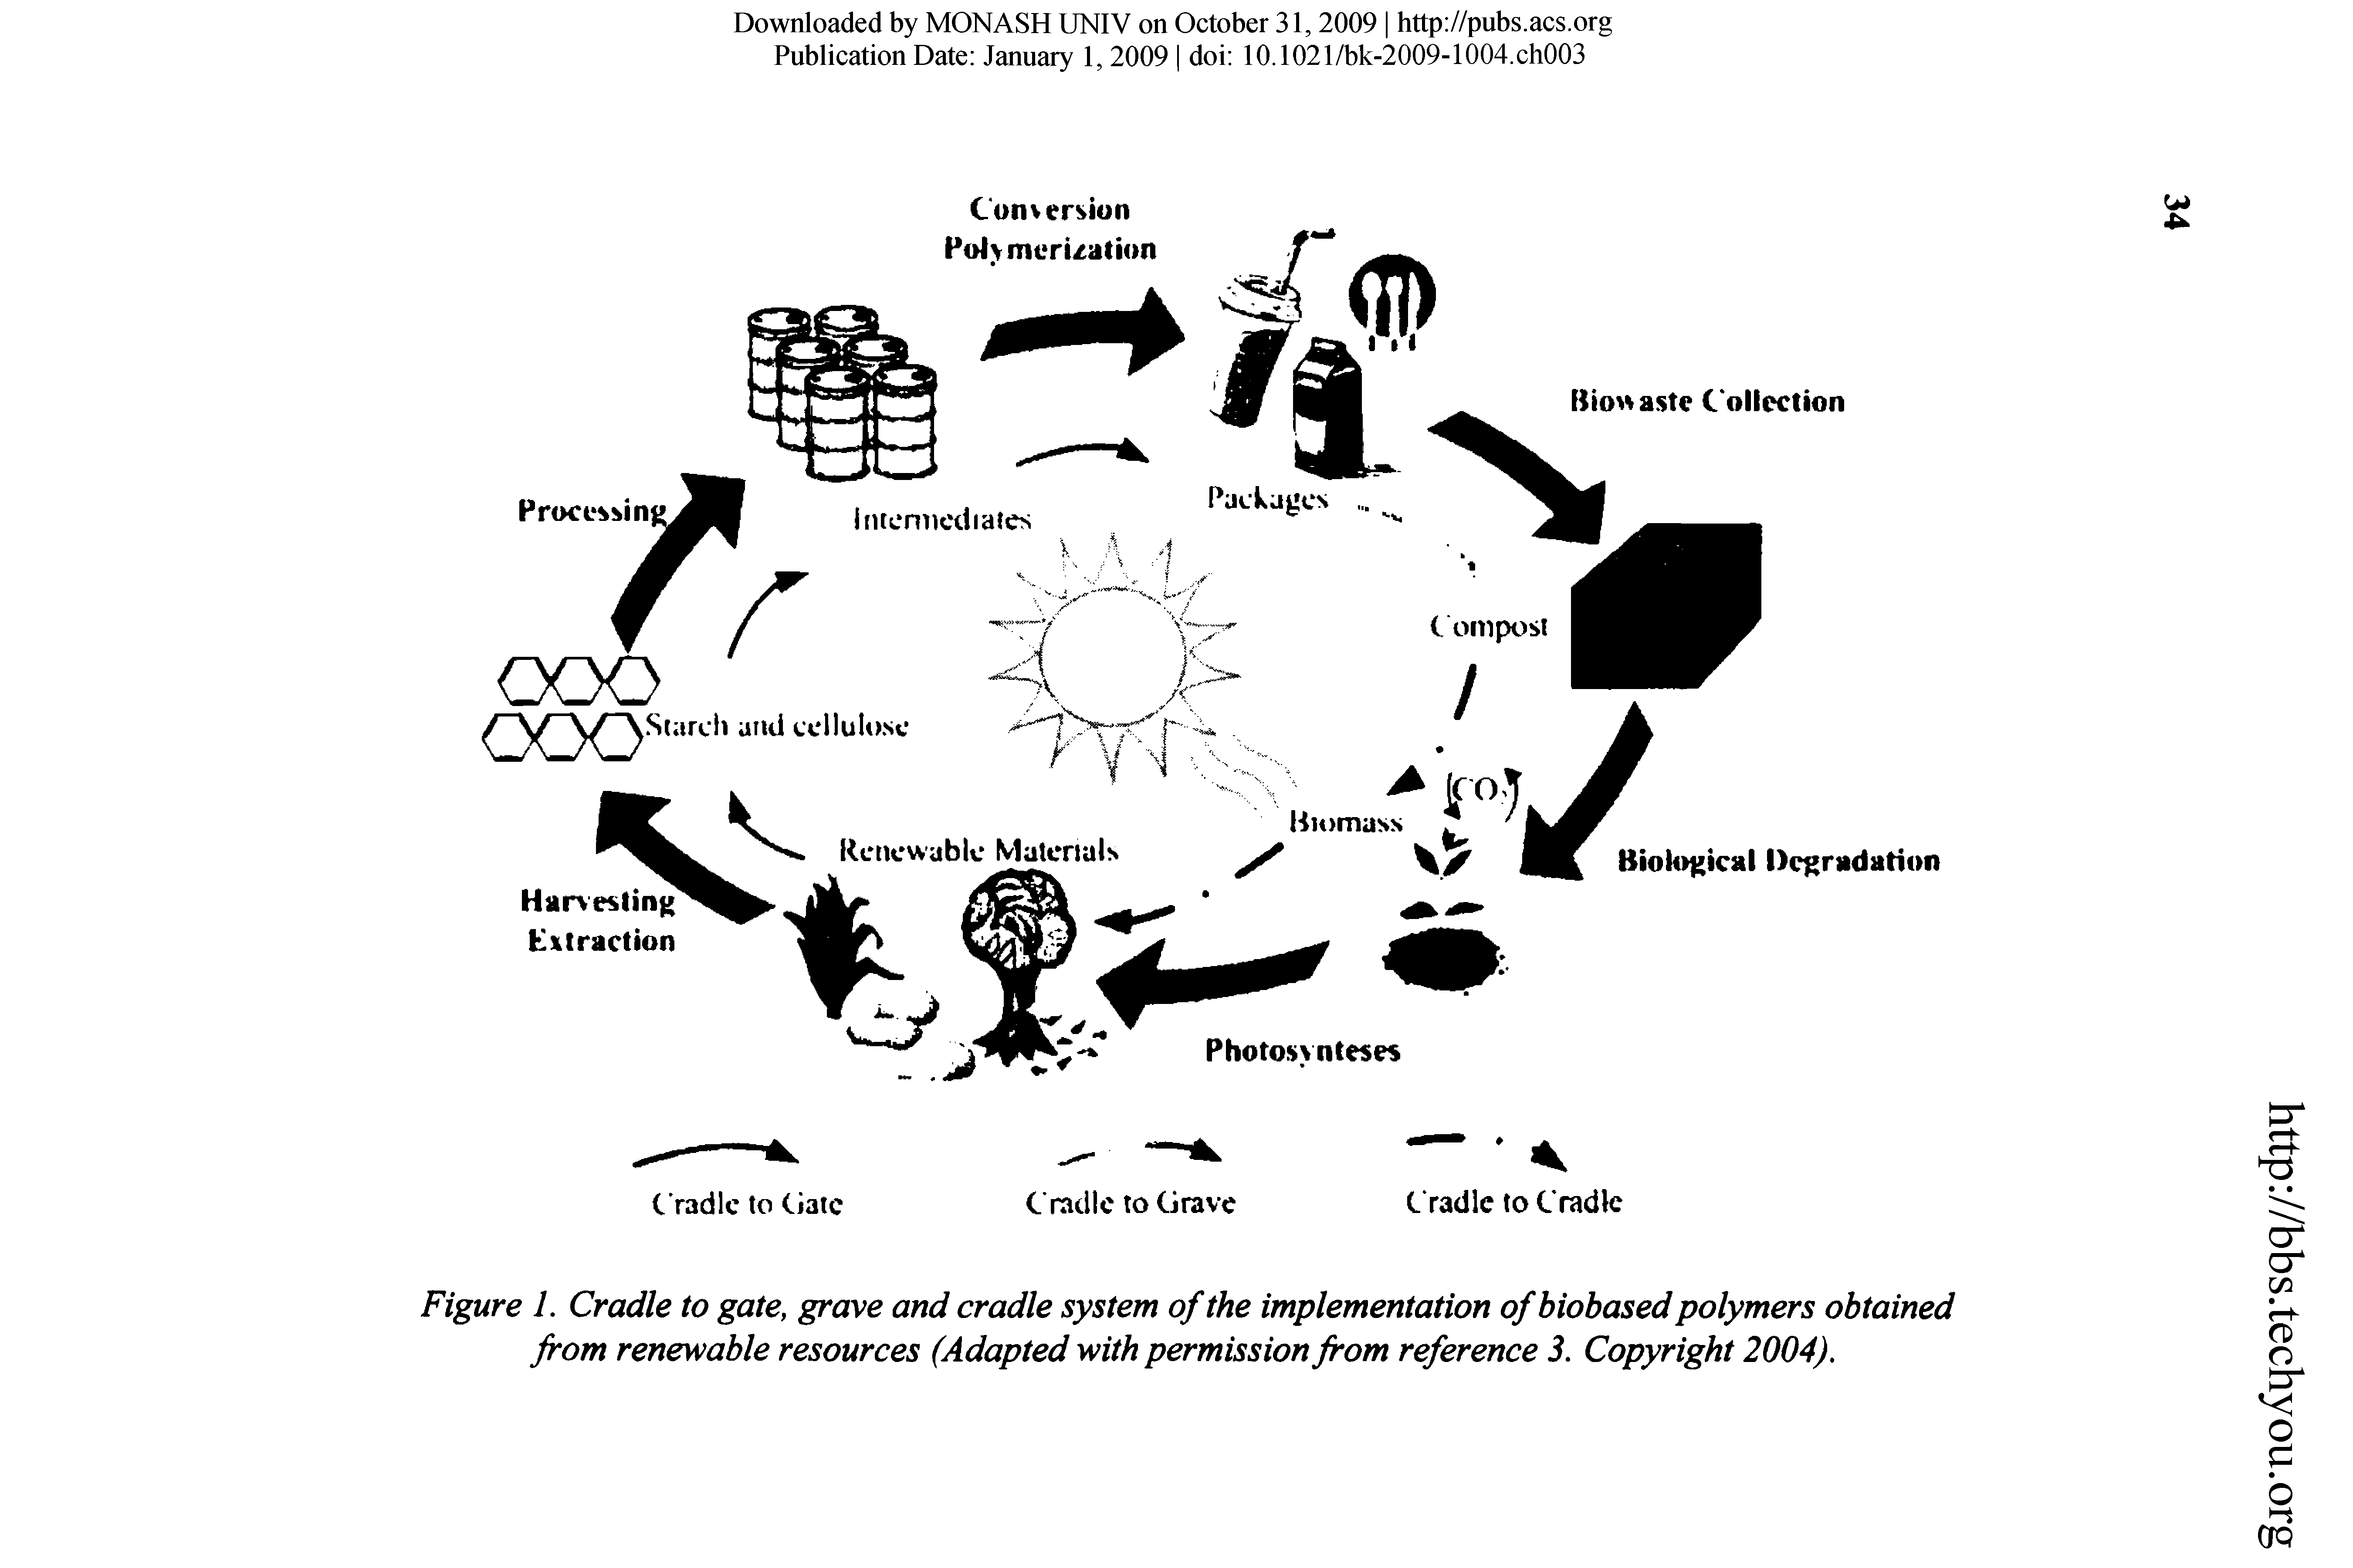 Figure 1. Cradle to gate, grave and cradle system of the implementation of biobased polymers obtained from renewable resources (Adapted with permission from reference 3. Copyright 2004).